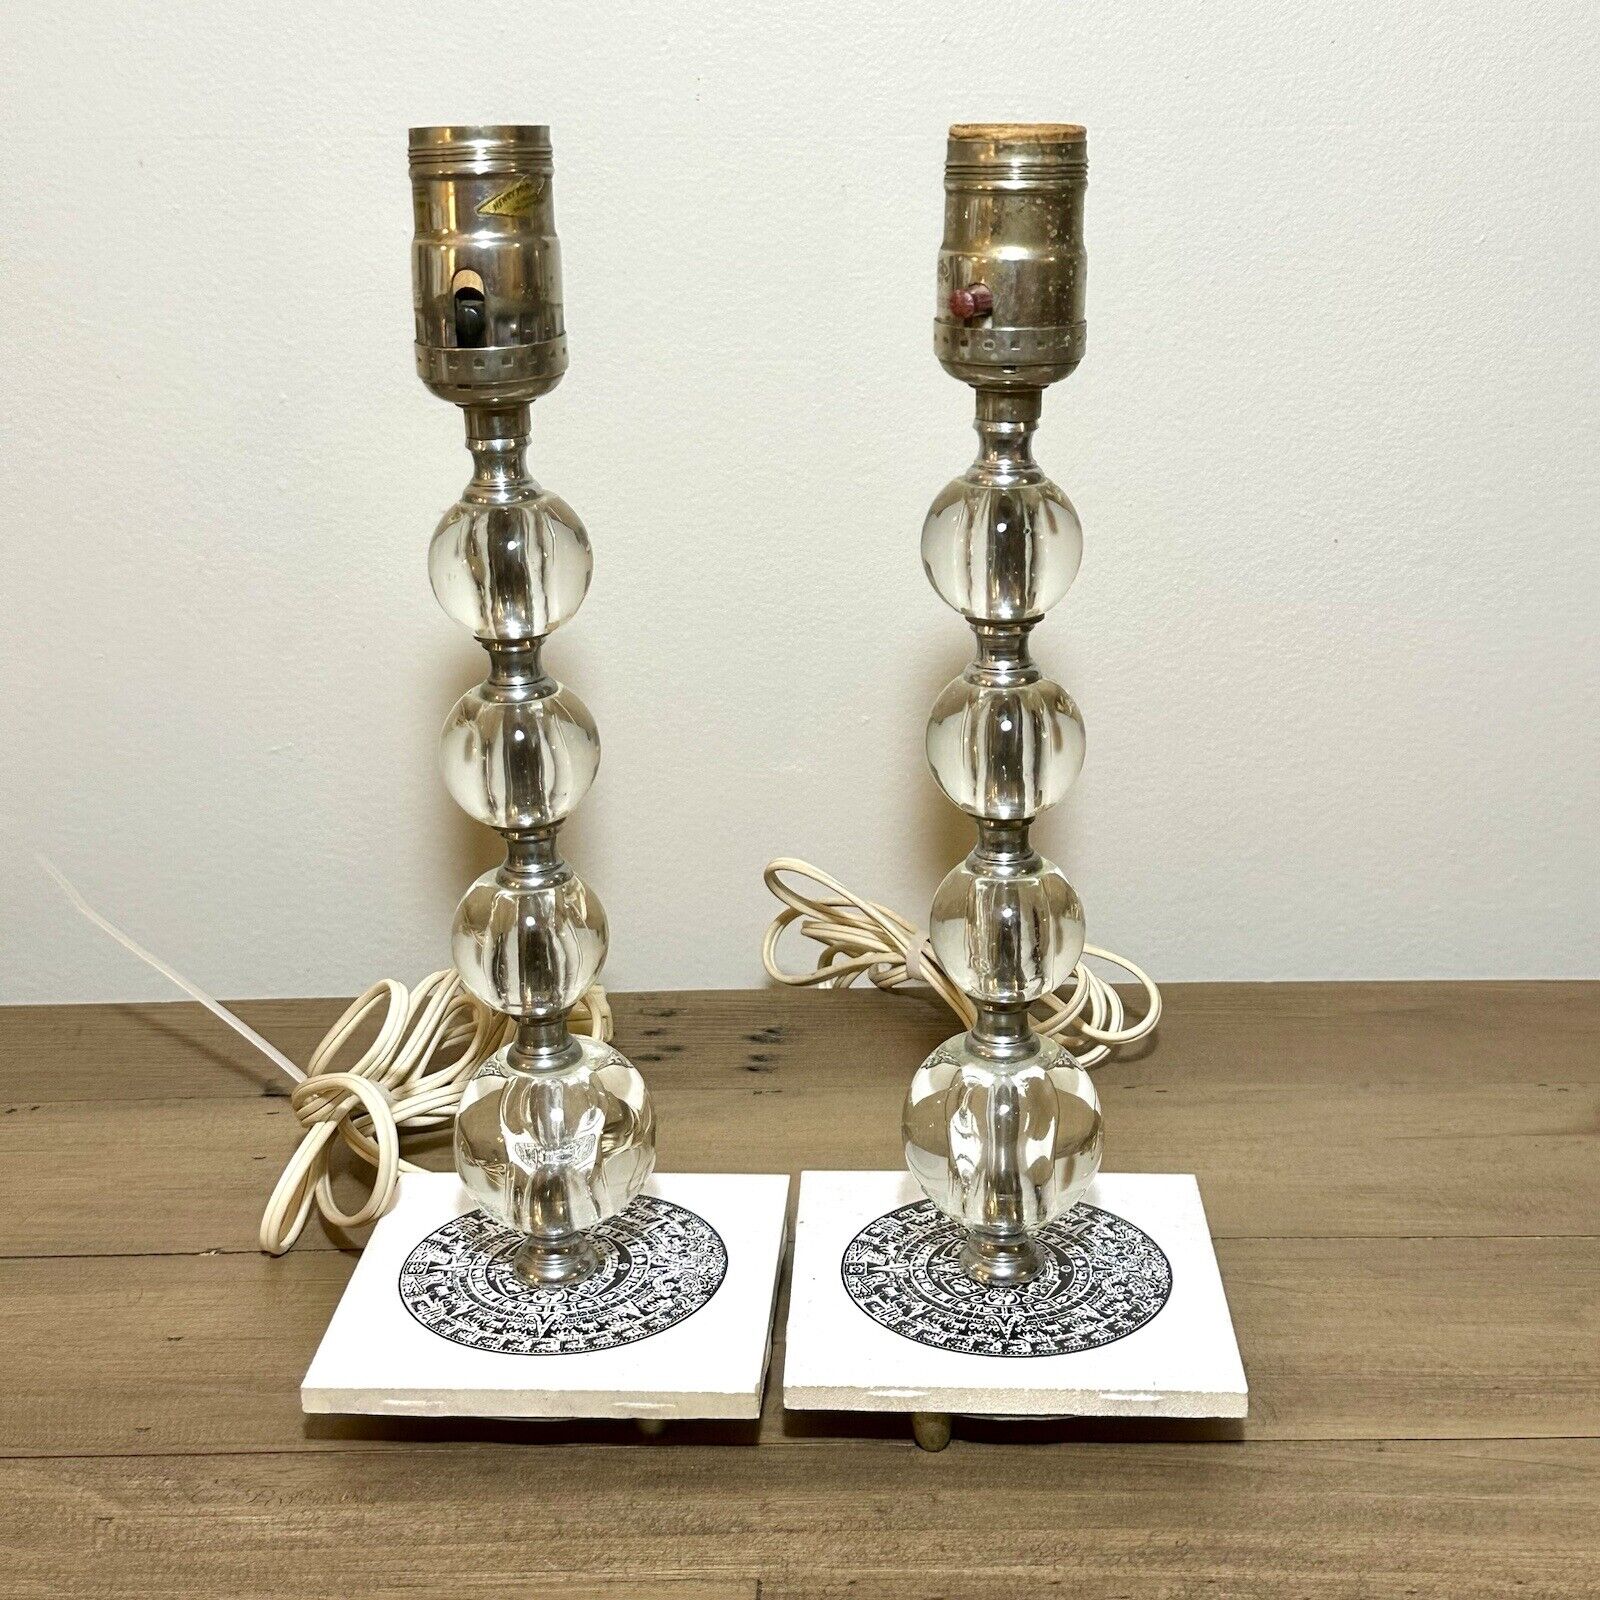 Pair Vintage Lucite Acrylic Boudoir Lamps Lamp W/ Stacked Ball And Graphic Base